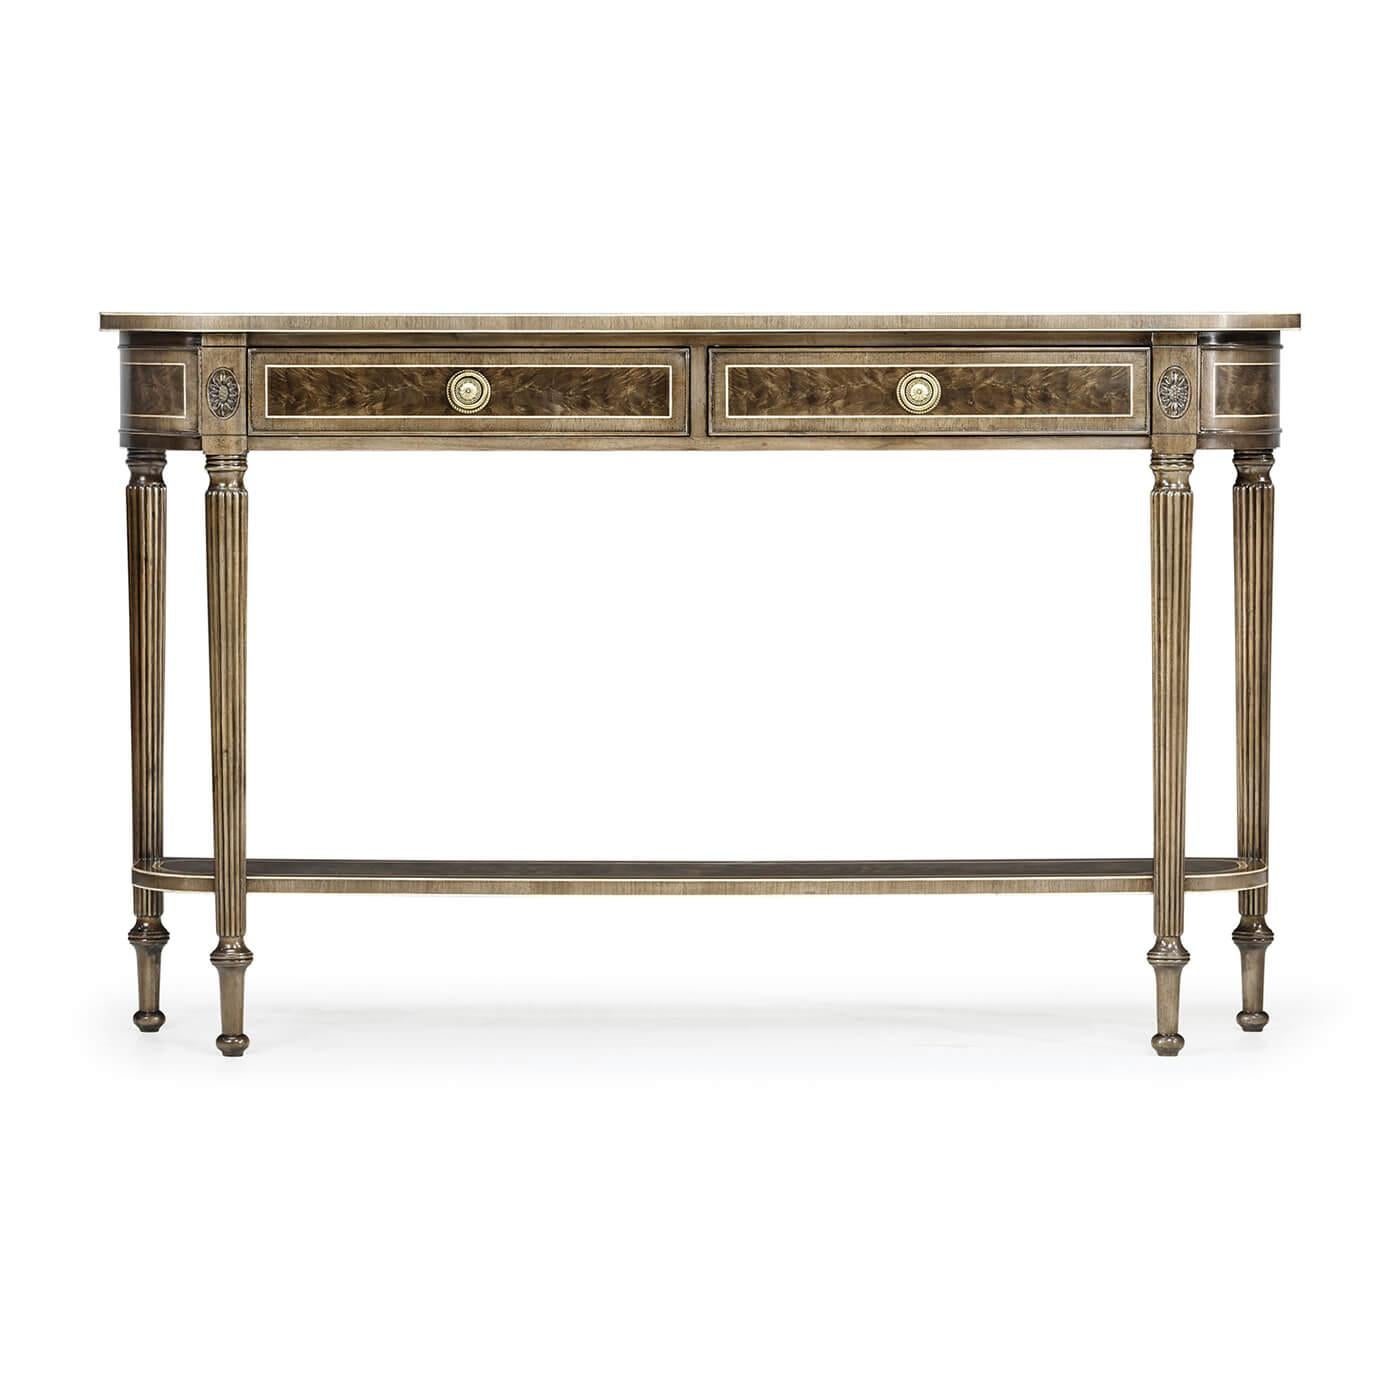 Late Regency style bleached mahogany D form console table with an antiqued finish, two drawers above a shaped under tier set between elegant carved reeded tapering legs topped with paterae.

Dimensions: 54